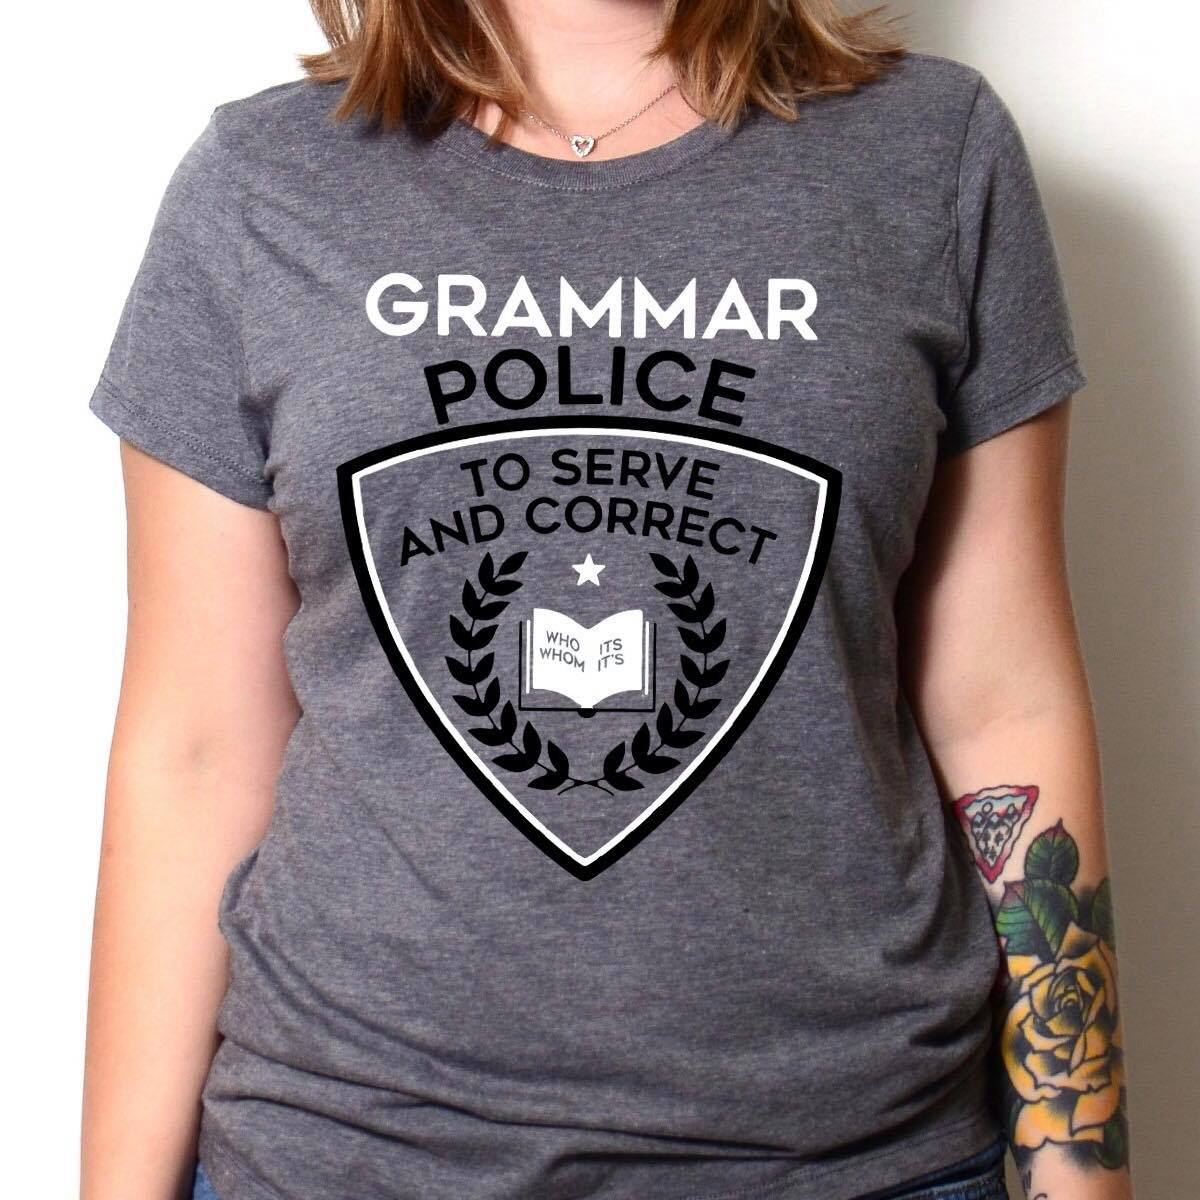 Grammar police to serve and correct